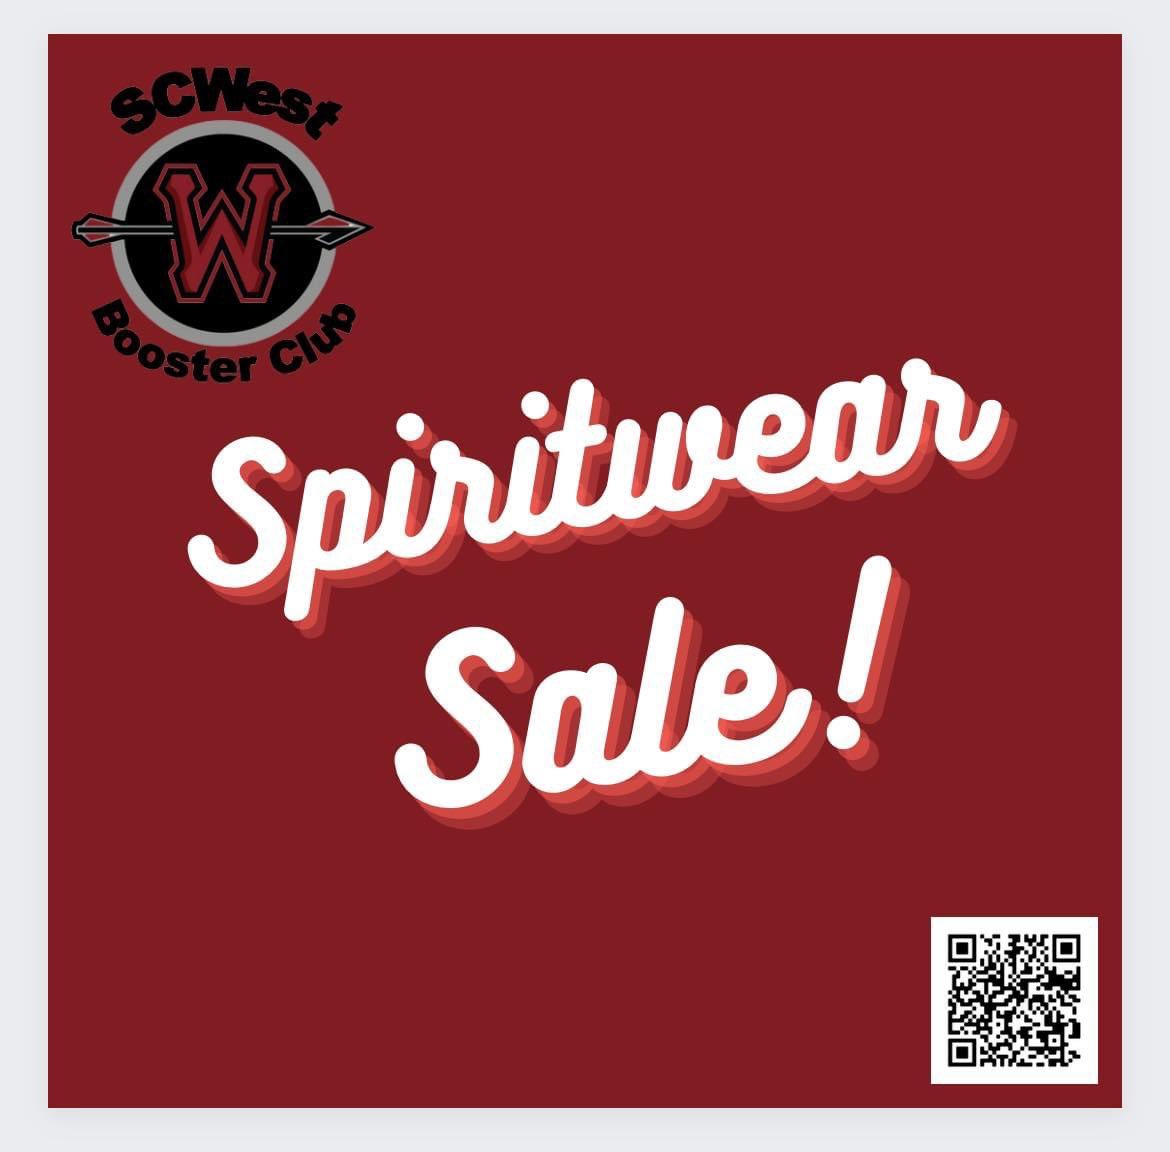 SCW families-don’t forget to order some new West spiritwear! The online store closes tomorrow, October 9. The items will be available for pick up in 2 weeks! stlshirtco.chipply.com/StCharlesWestH…